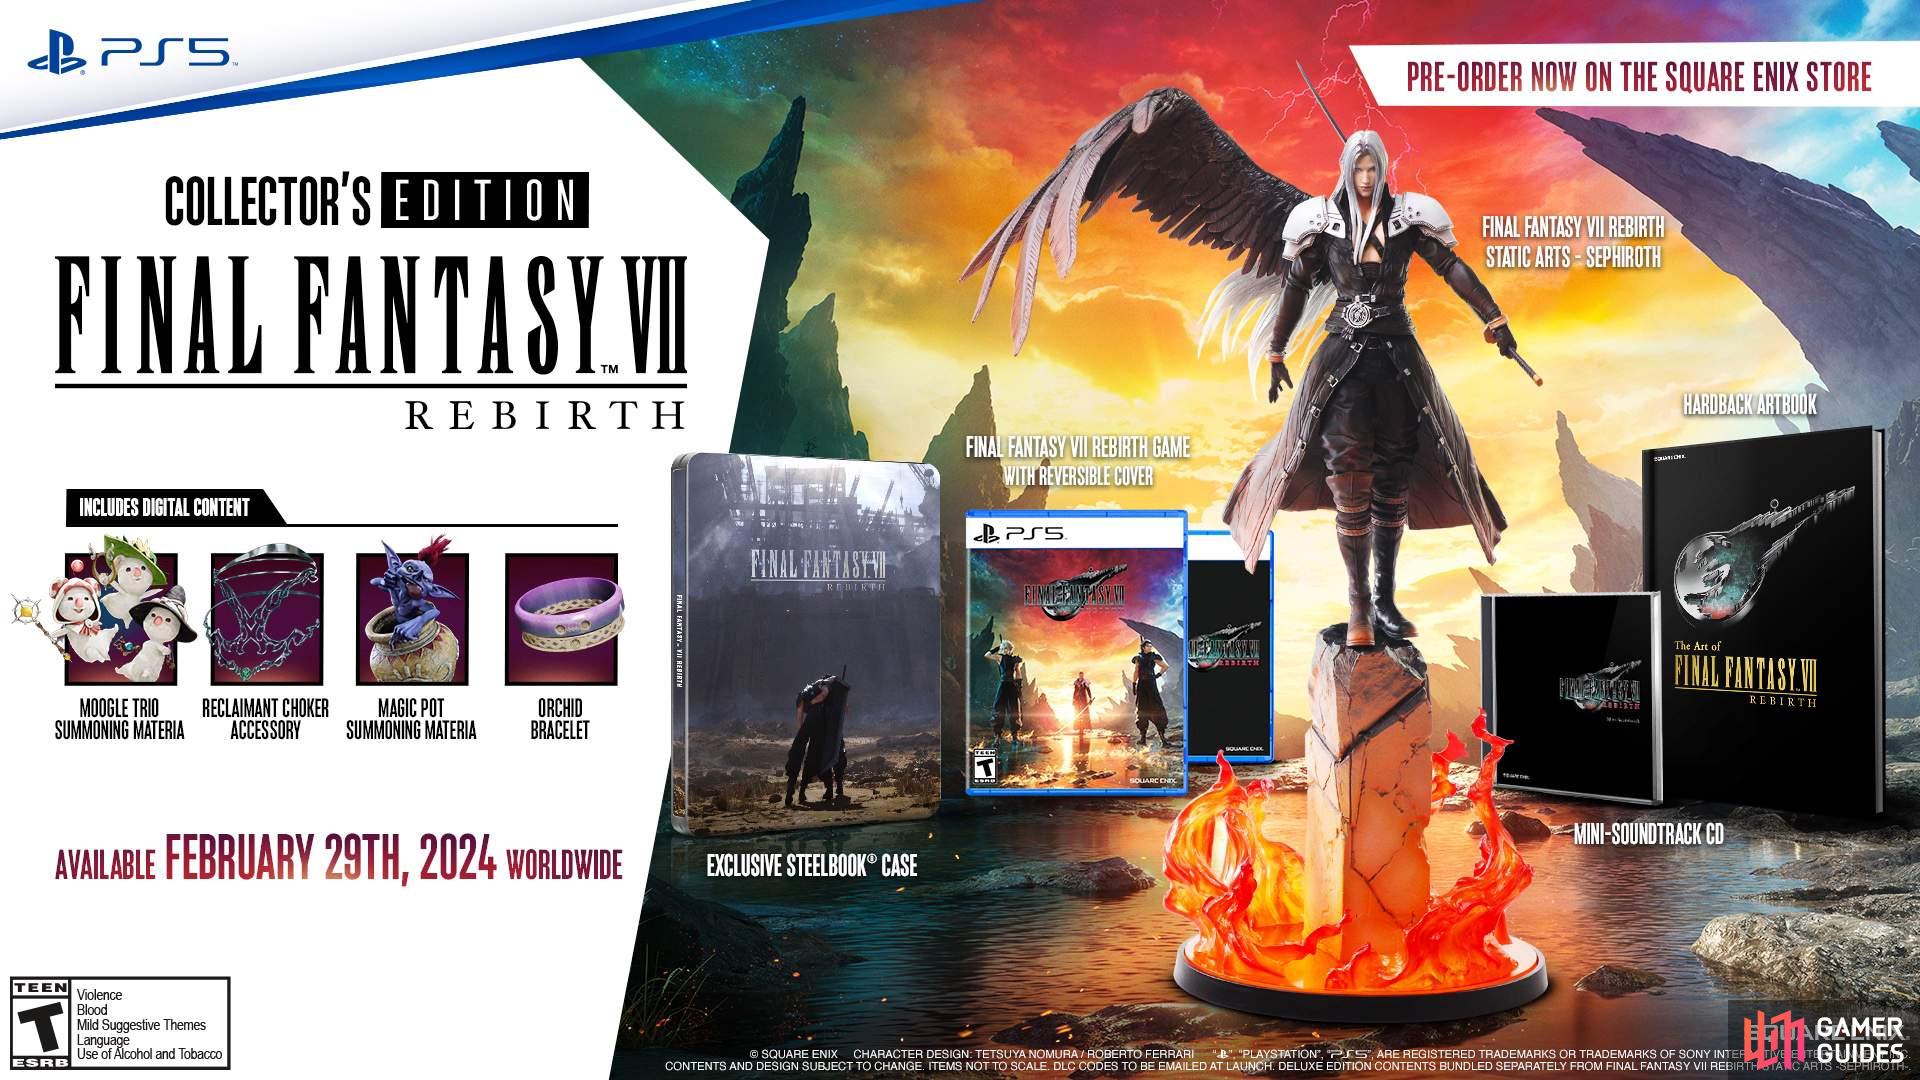 The Collector’s Edition will give you a statue of Sephiroth!